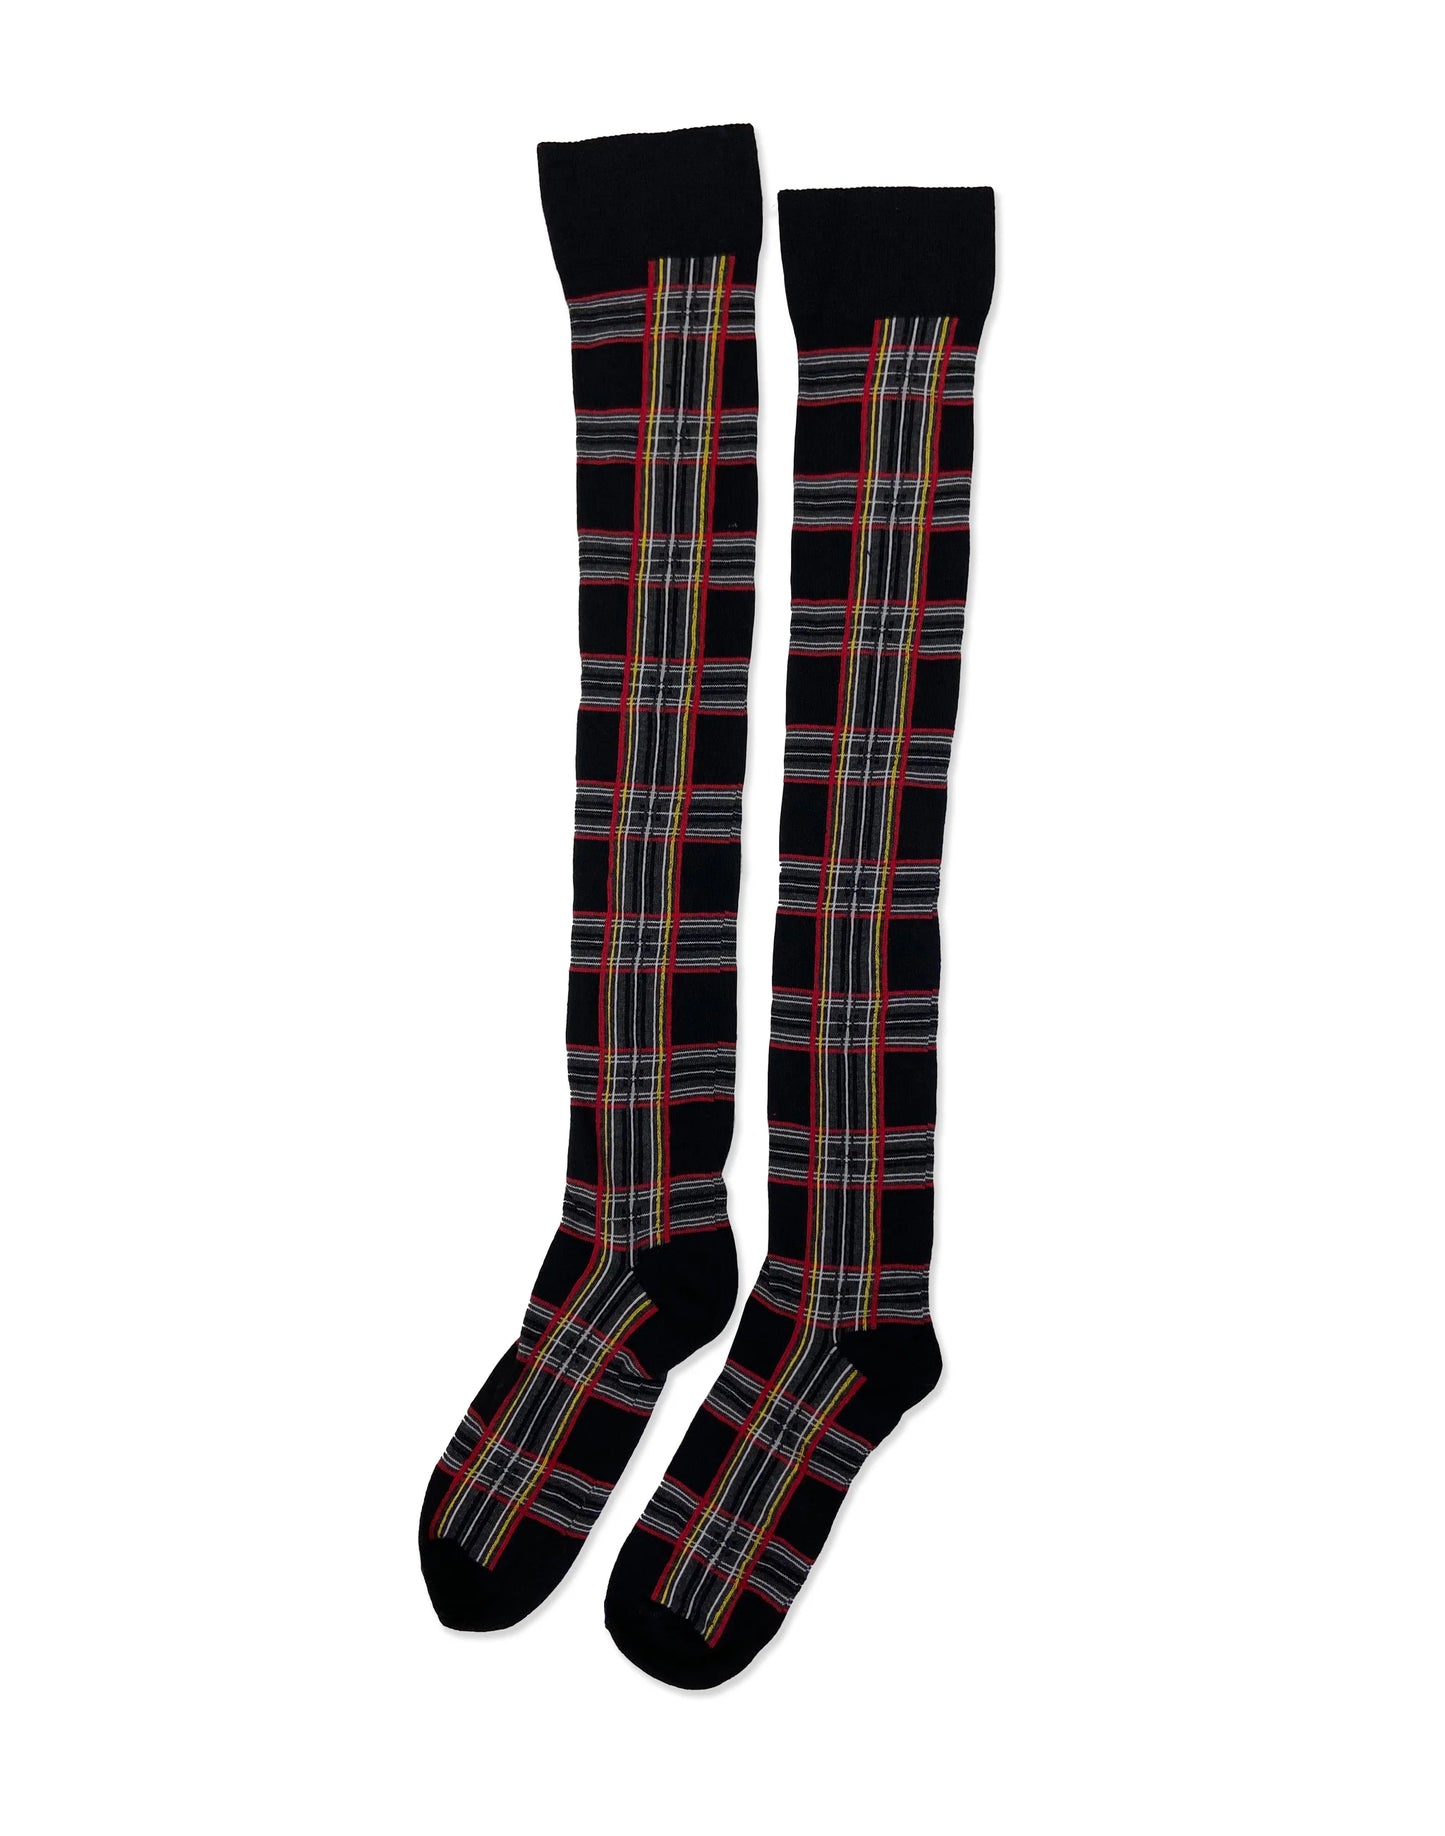 Pamela Mann Tartan Over-Knee Socks - Black cotton mix over the knee long socks with a plaid check pattern in red, yellow and grey.